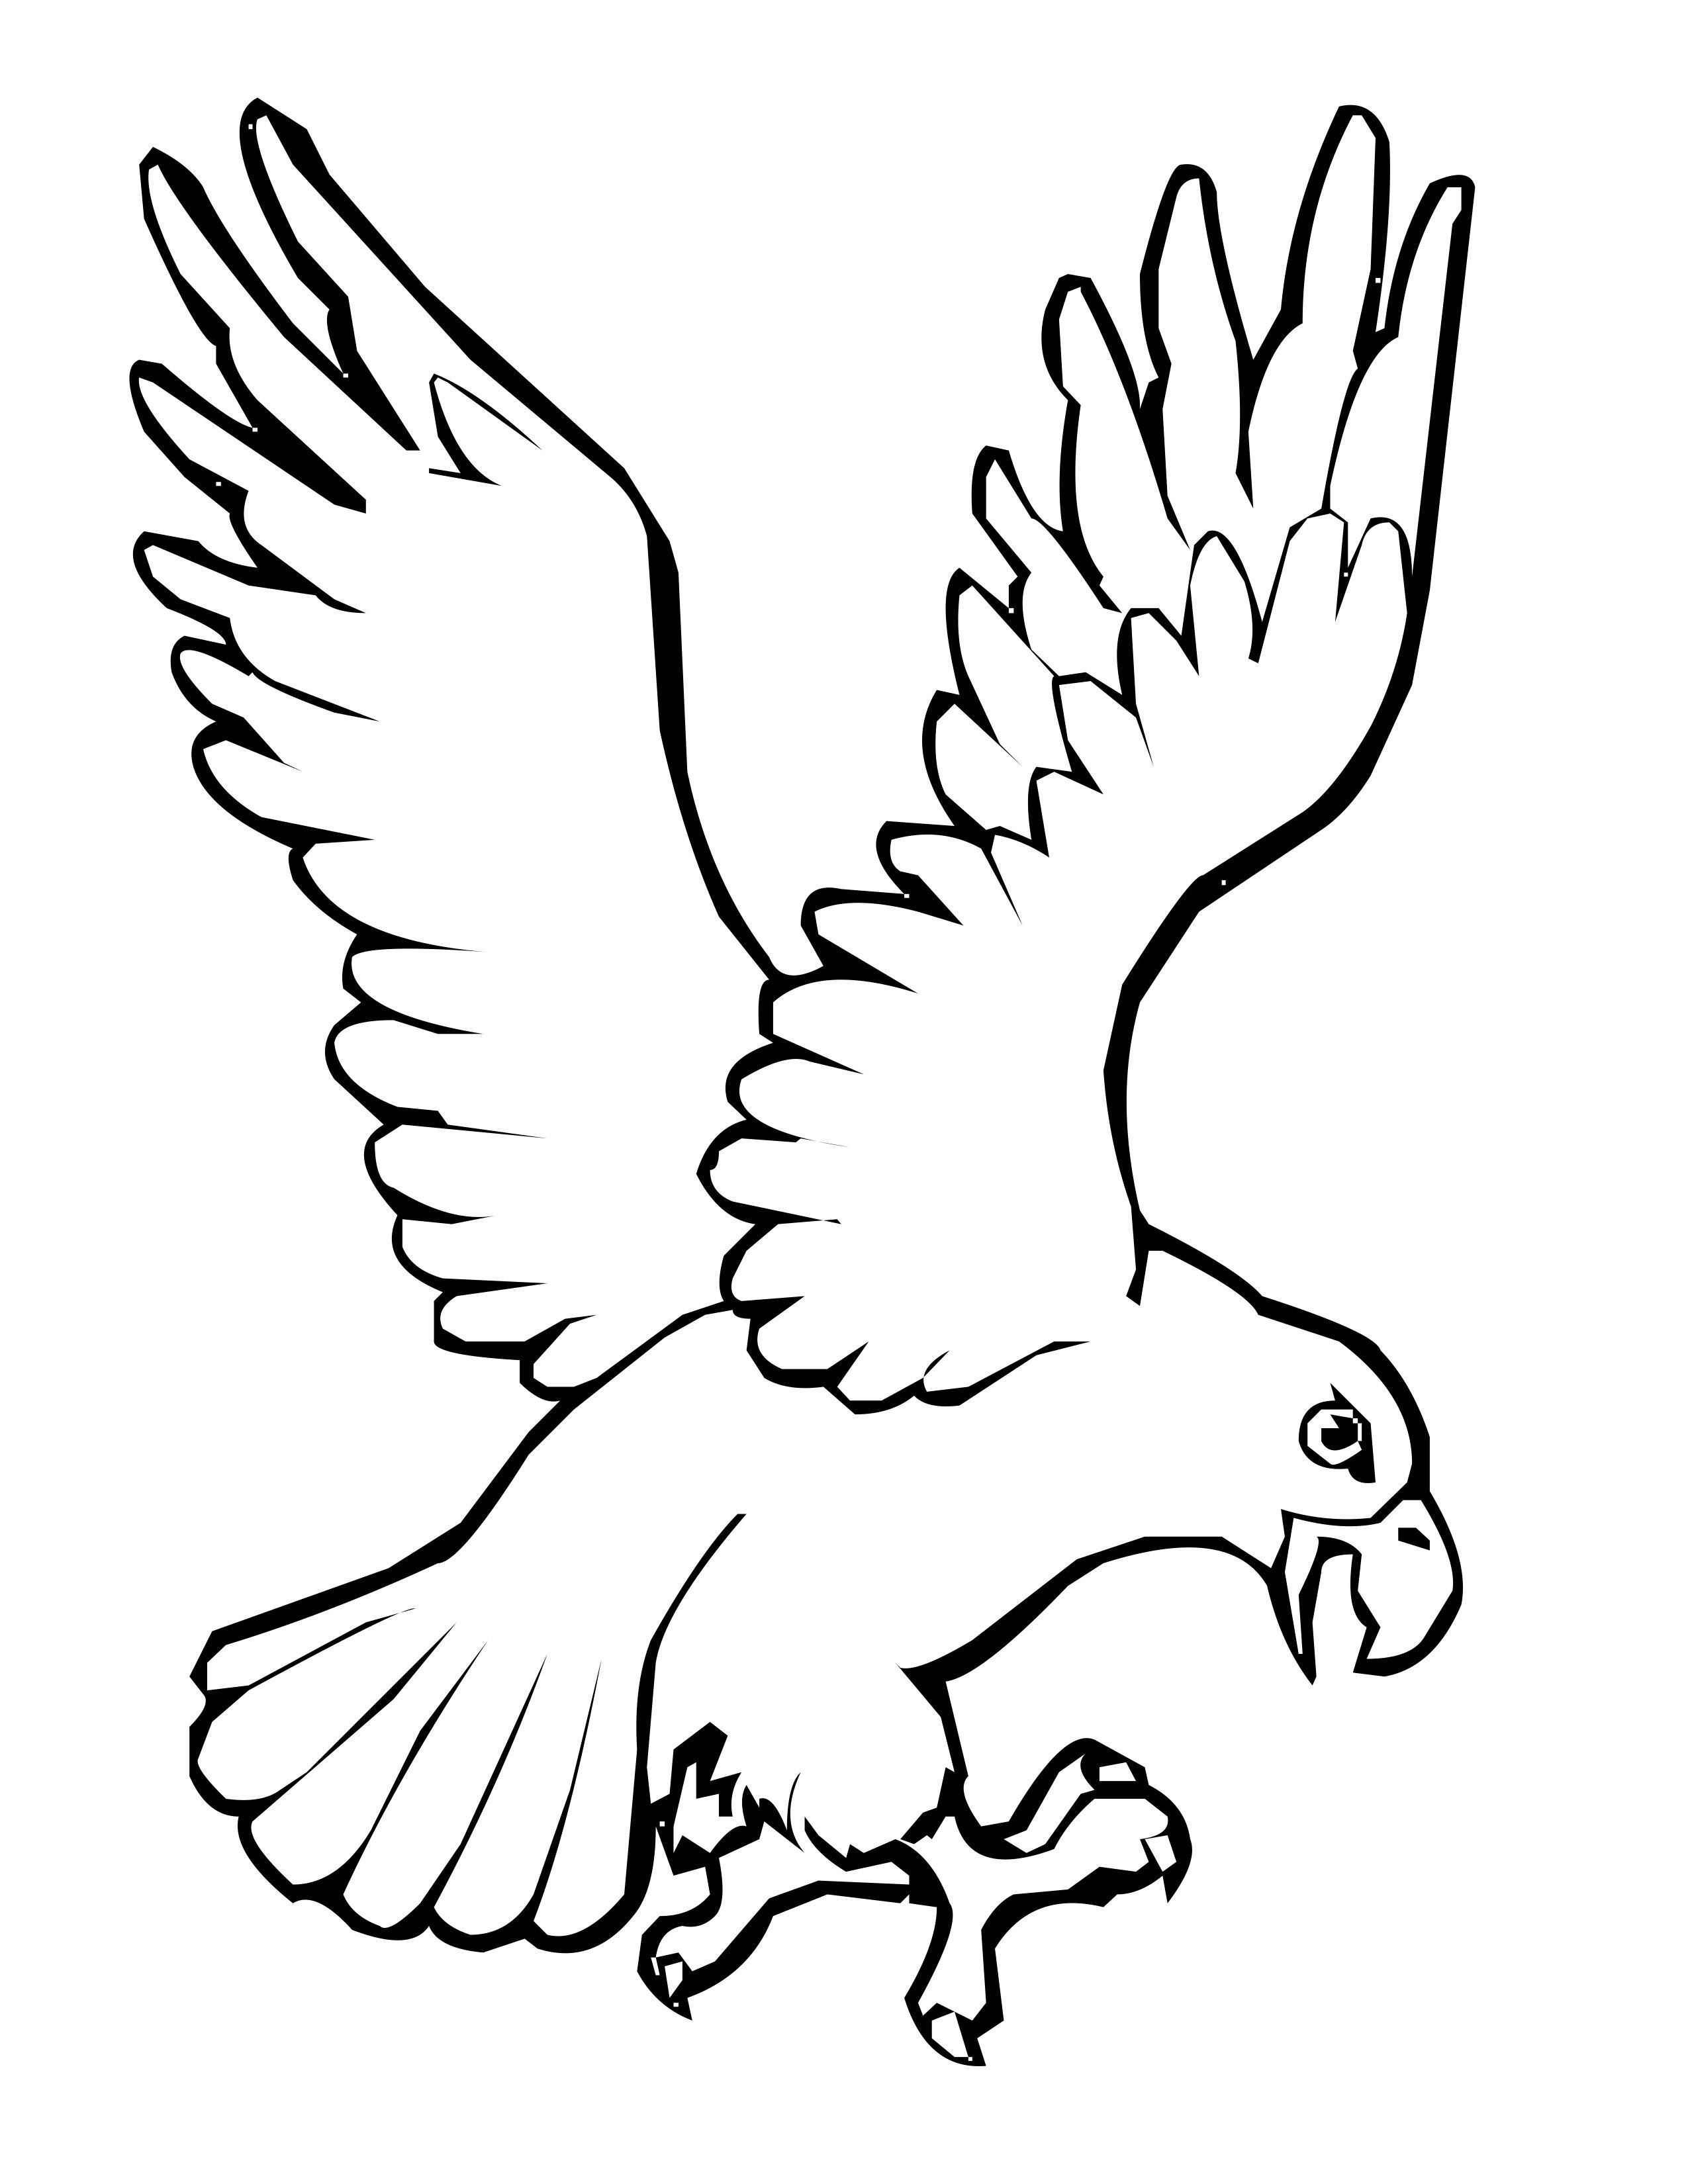 Bird Wings Coloring Pages at GetColorings.com | Free ...